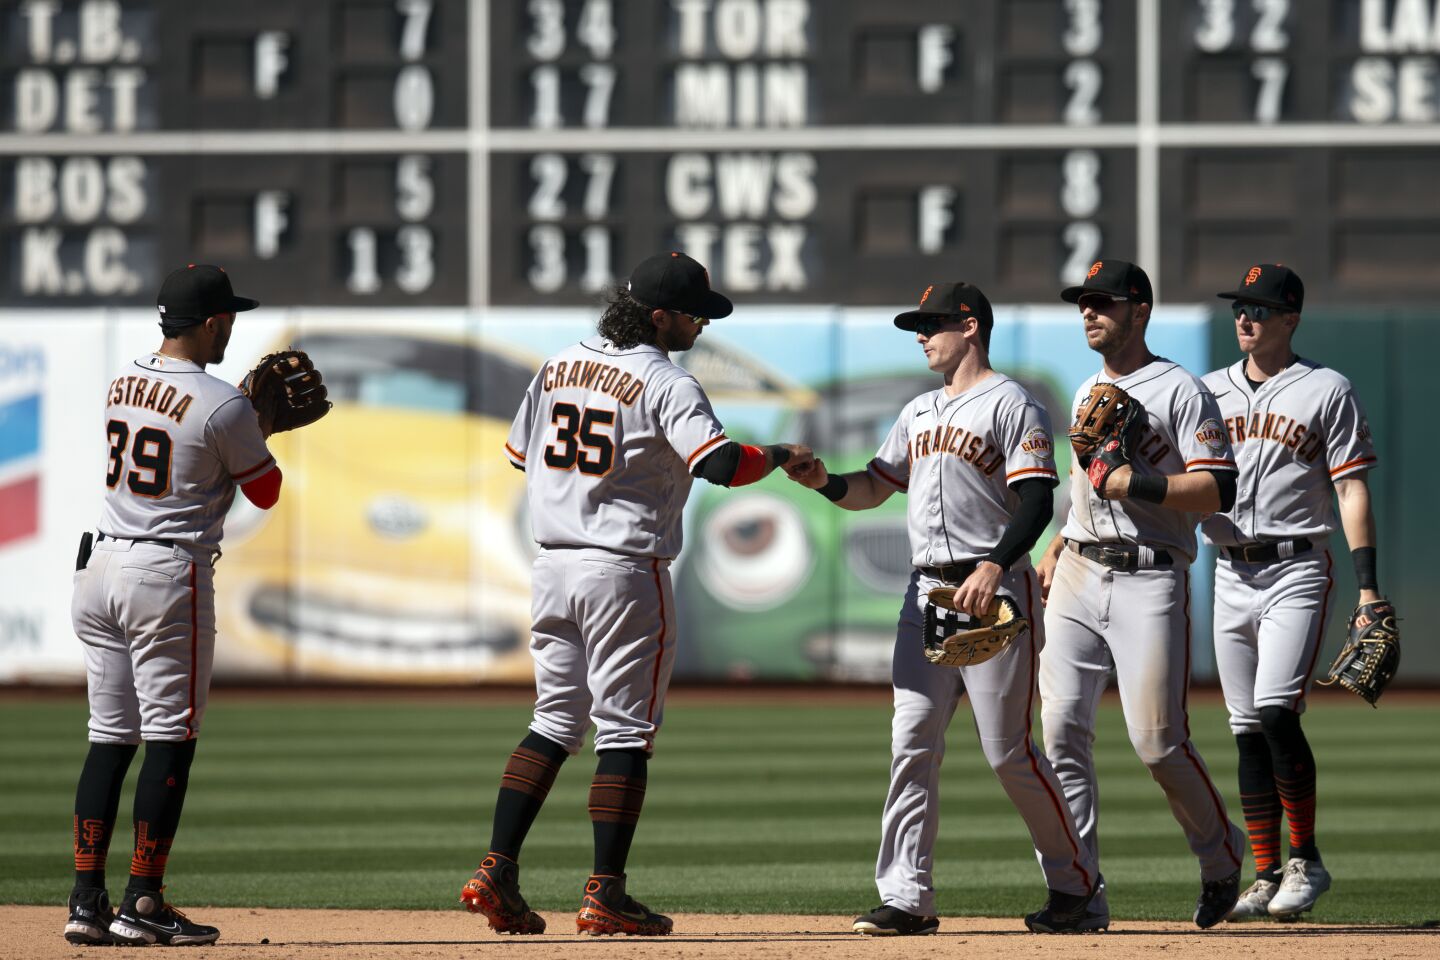 San Francisco Giants players celebrate their victory over the Oakland Athletics in a baseball game, Sunday, Aug. 7, 2022, in Oakland, Calif. (AP Photo/D. Ross Cameron)